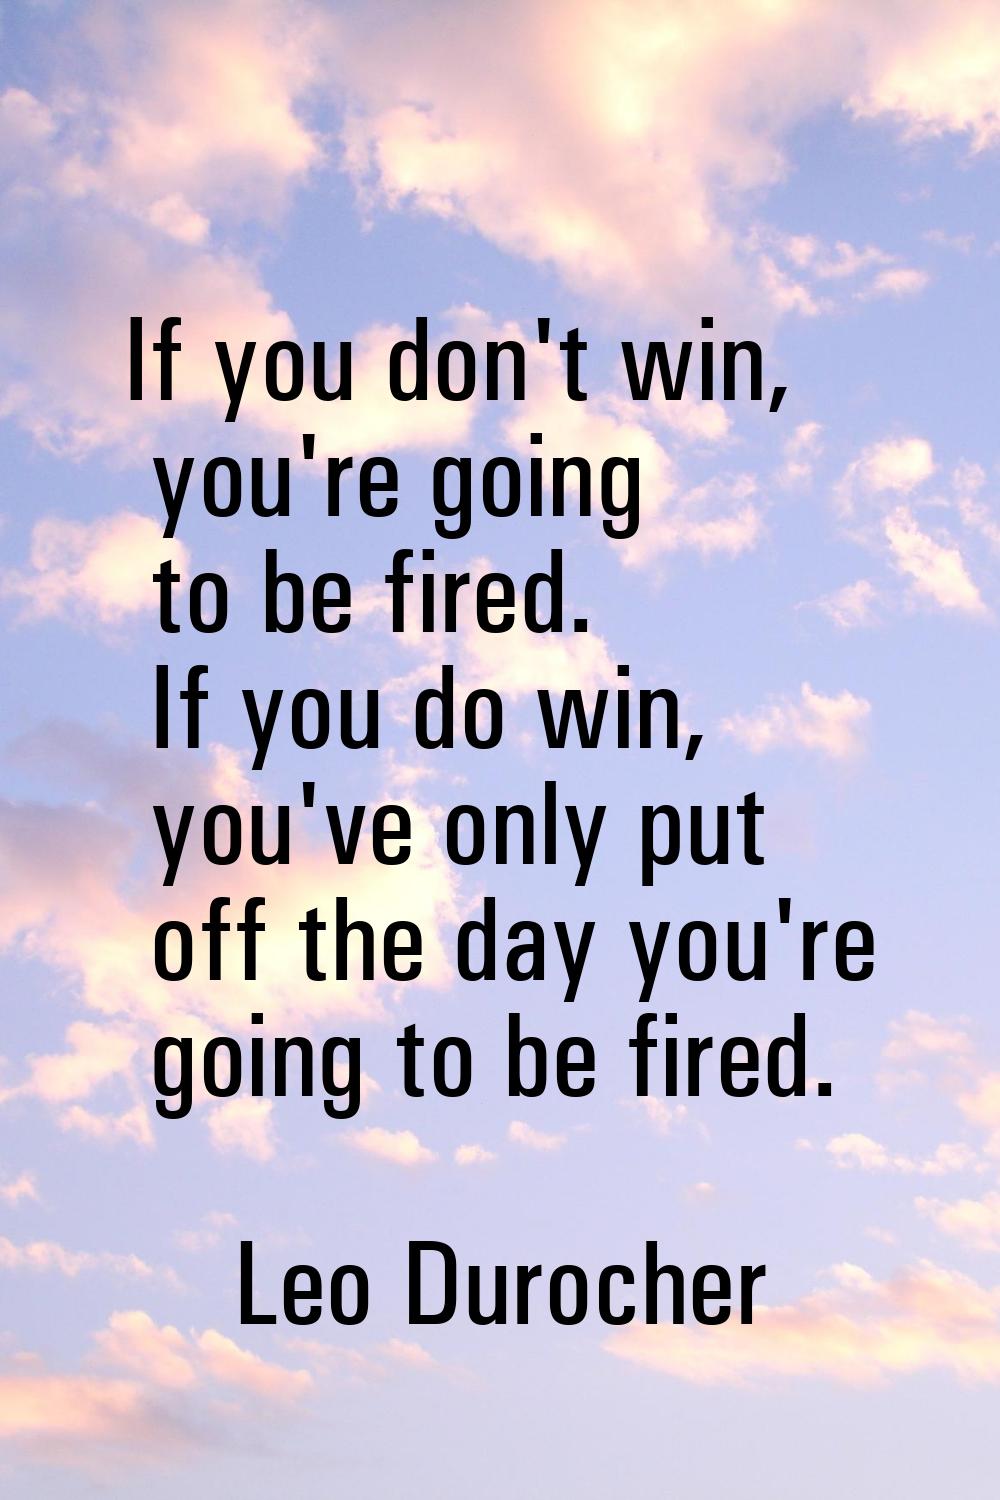 If you don't win, you're going to be fired. If you do win, you've only put off the day you're going